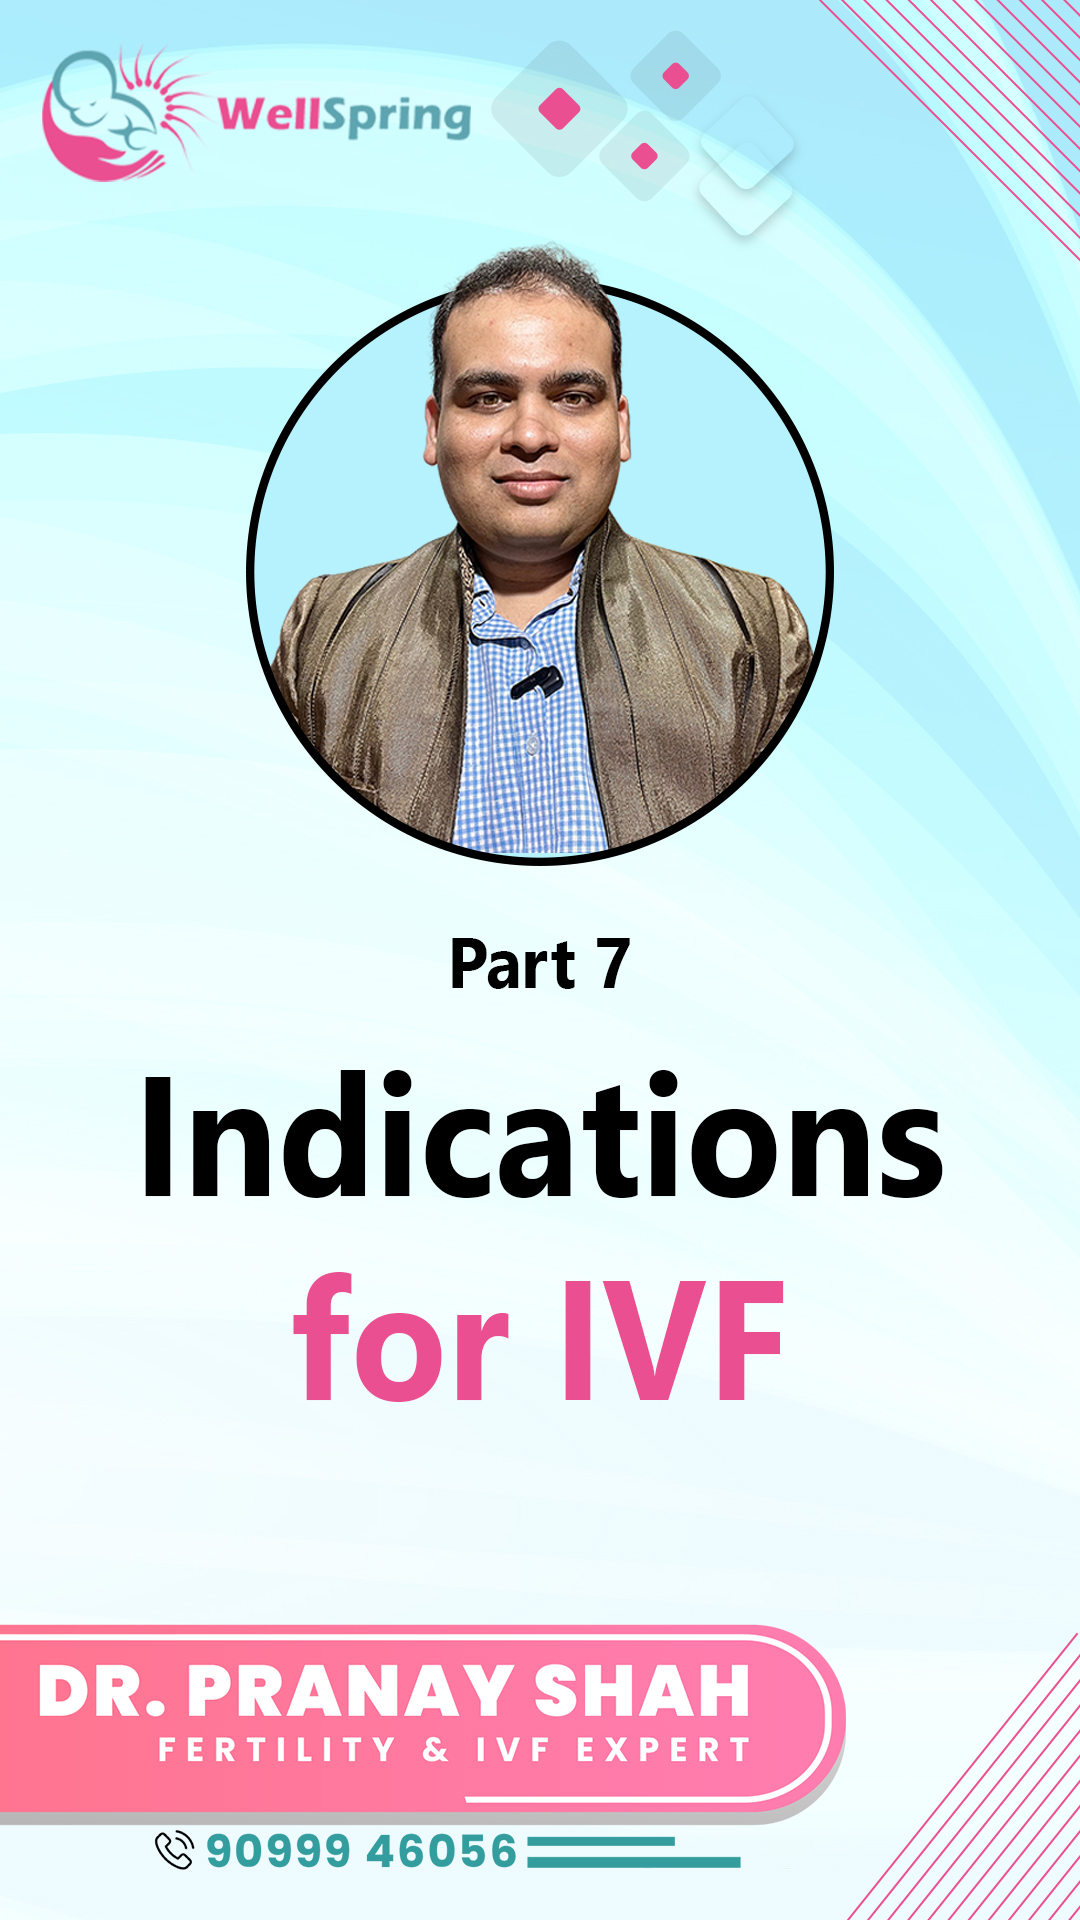 What are the indications for IVF treatment? – Part 07